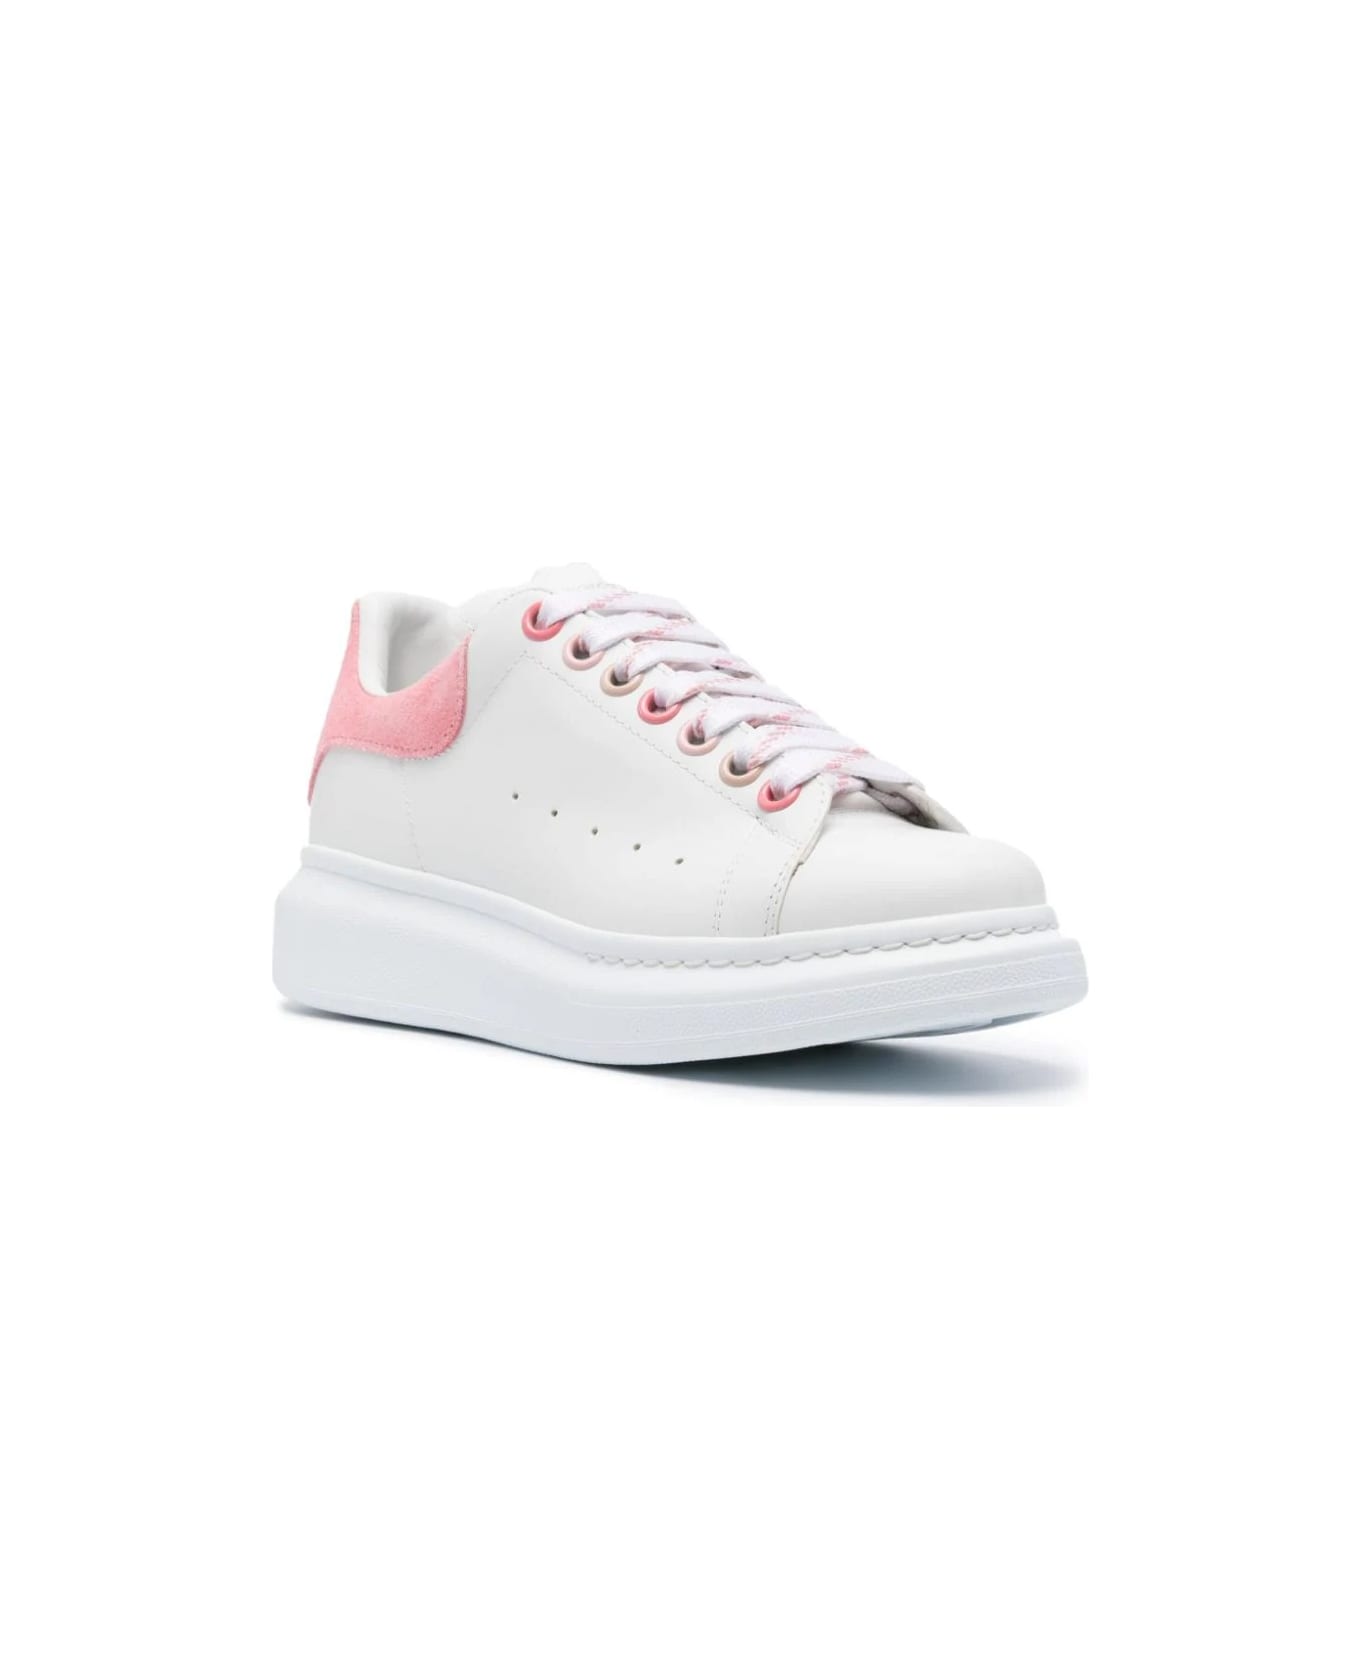 Alexander McQueen White Oversized Sneakers With Pink And Multicolour Details - White